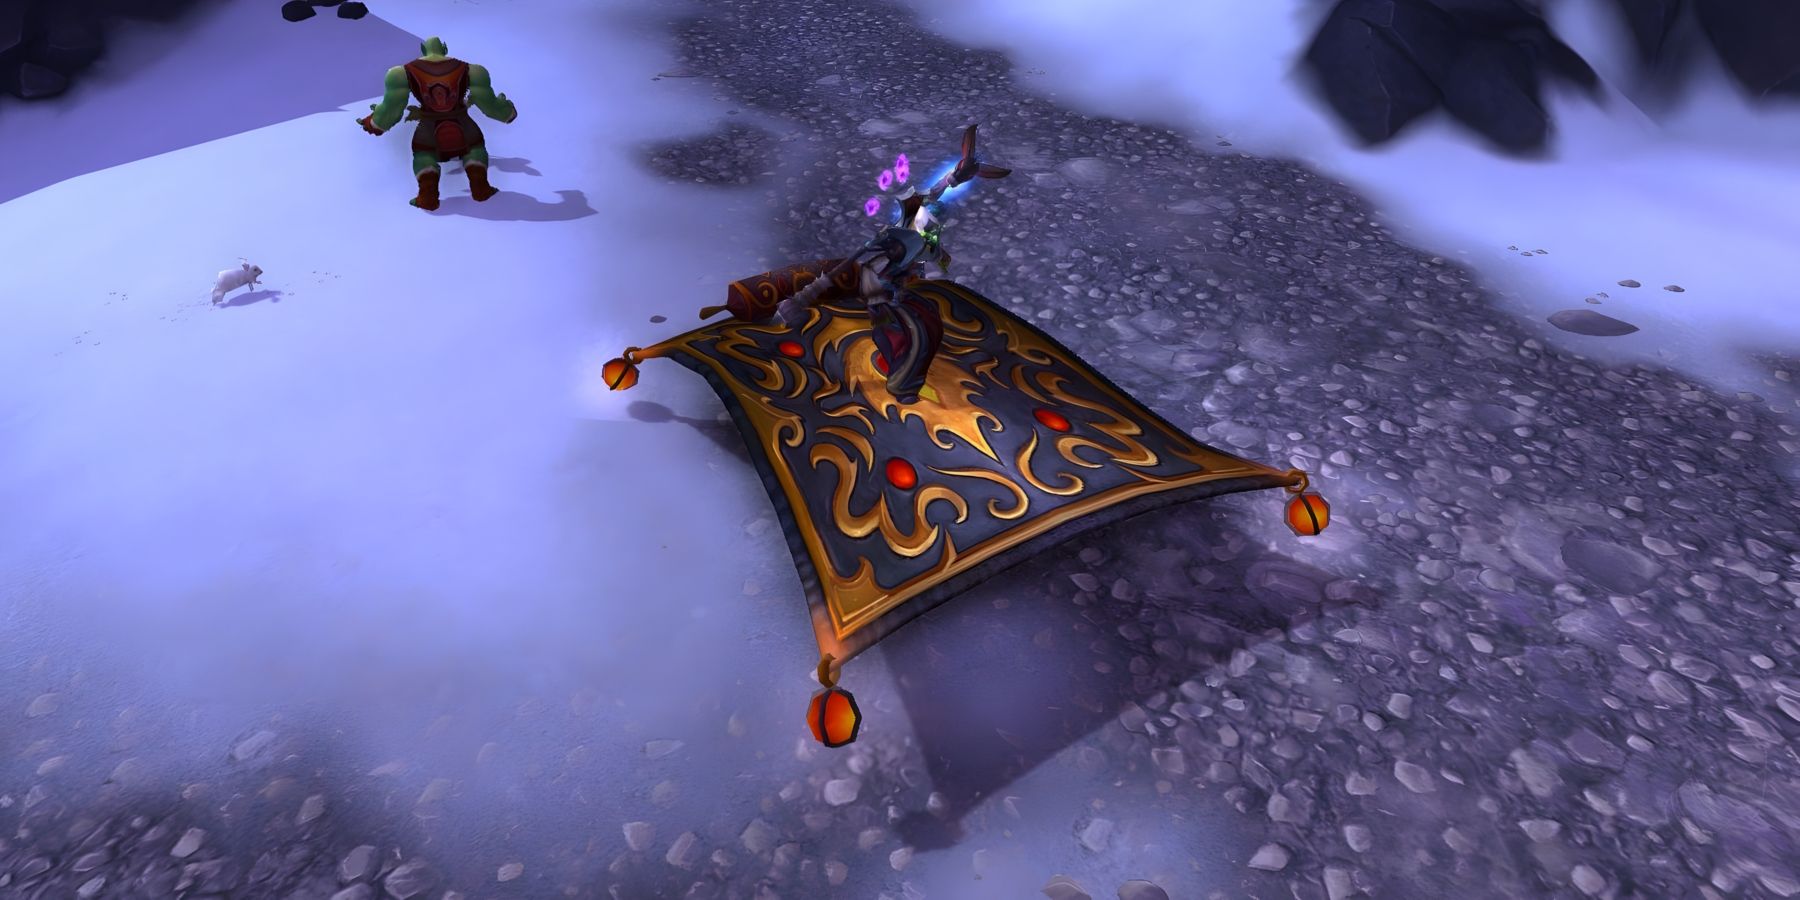 Screenshot of a player riding a creeper in World of Warcraft